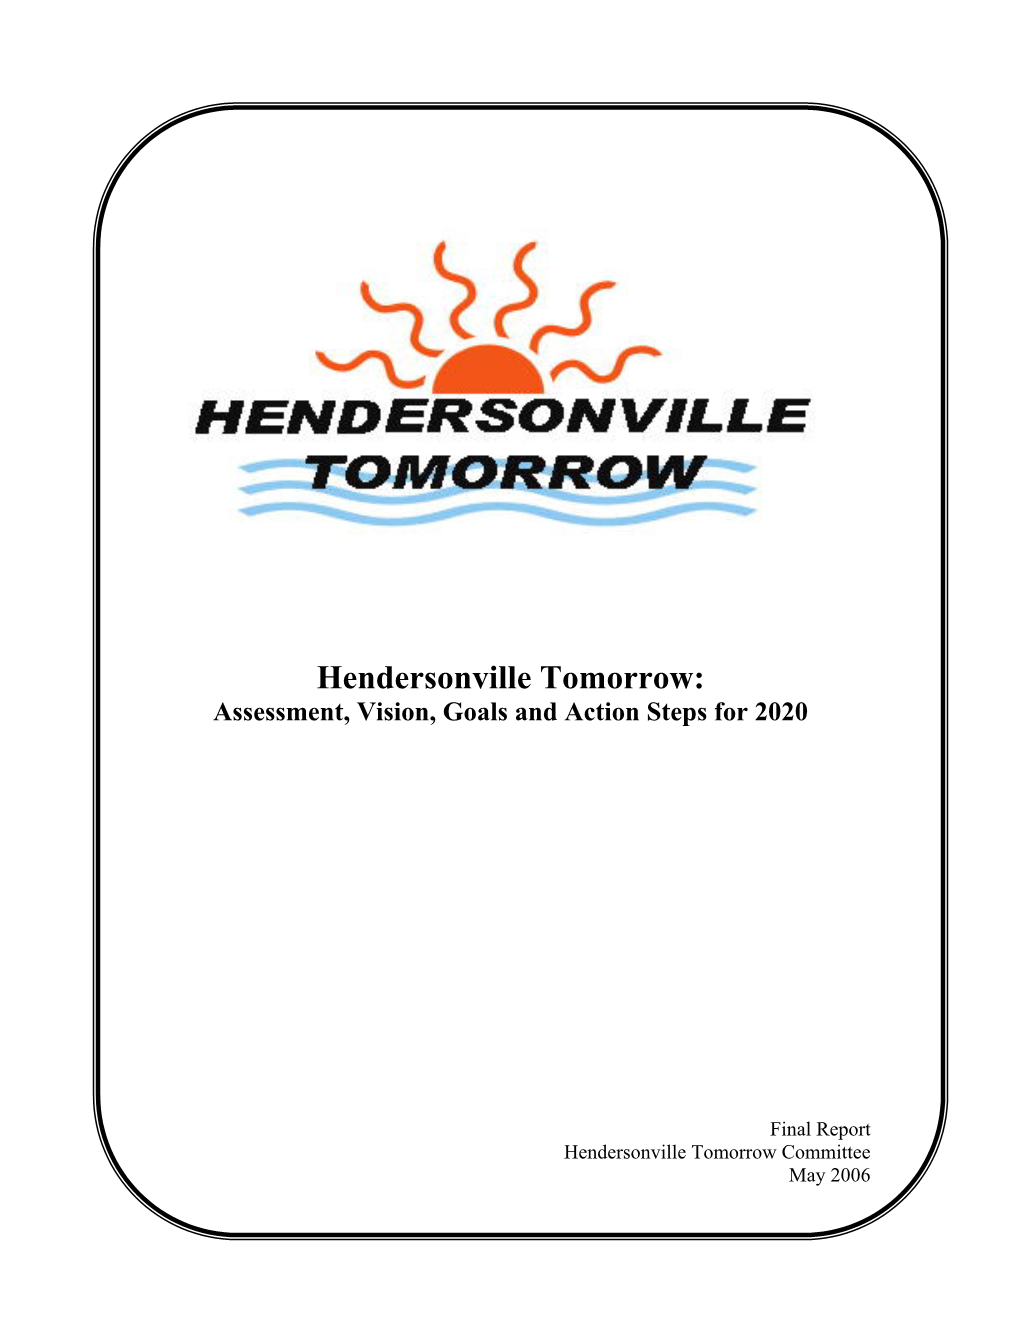 Hendersonville Tomorrow: Assessment, Vision, Goals and Action Steps for 2020